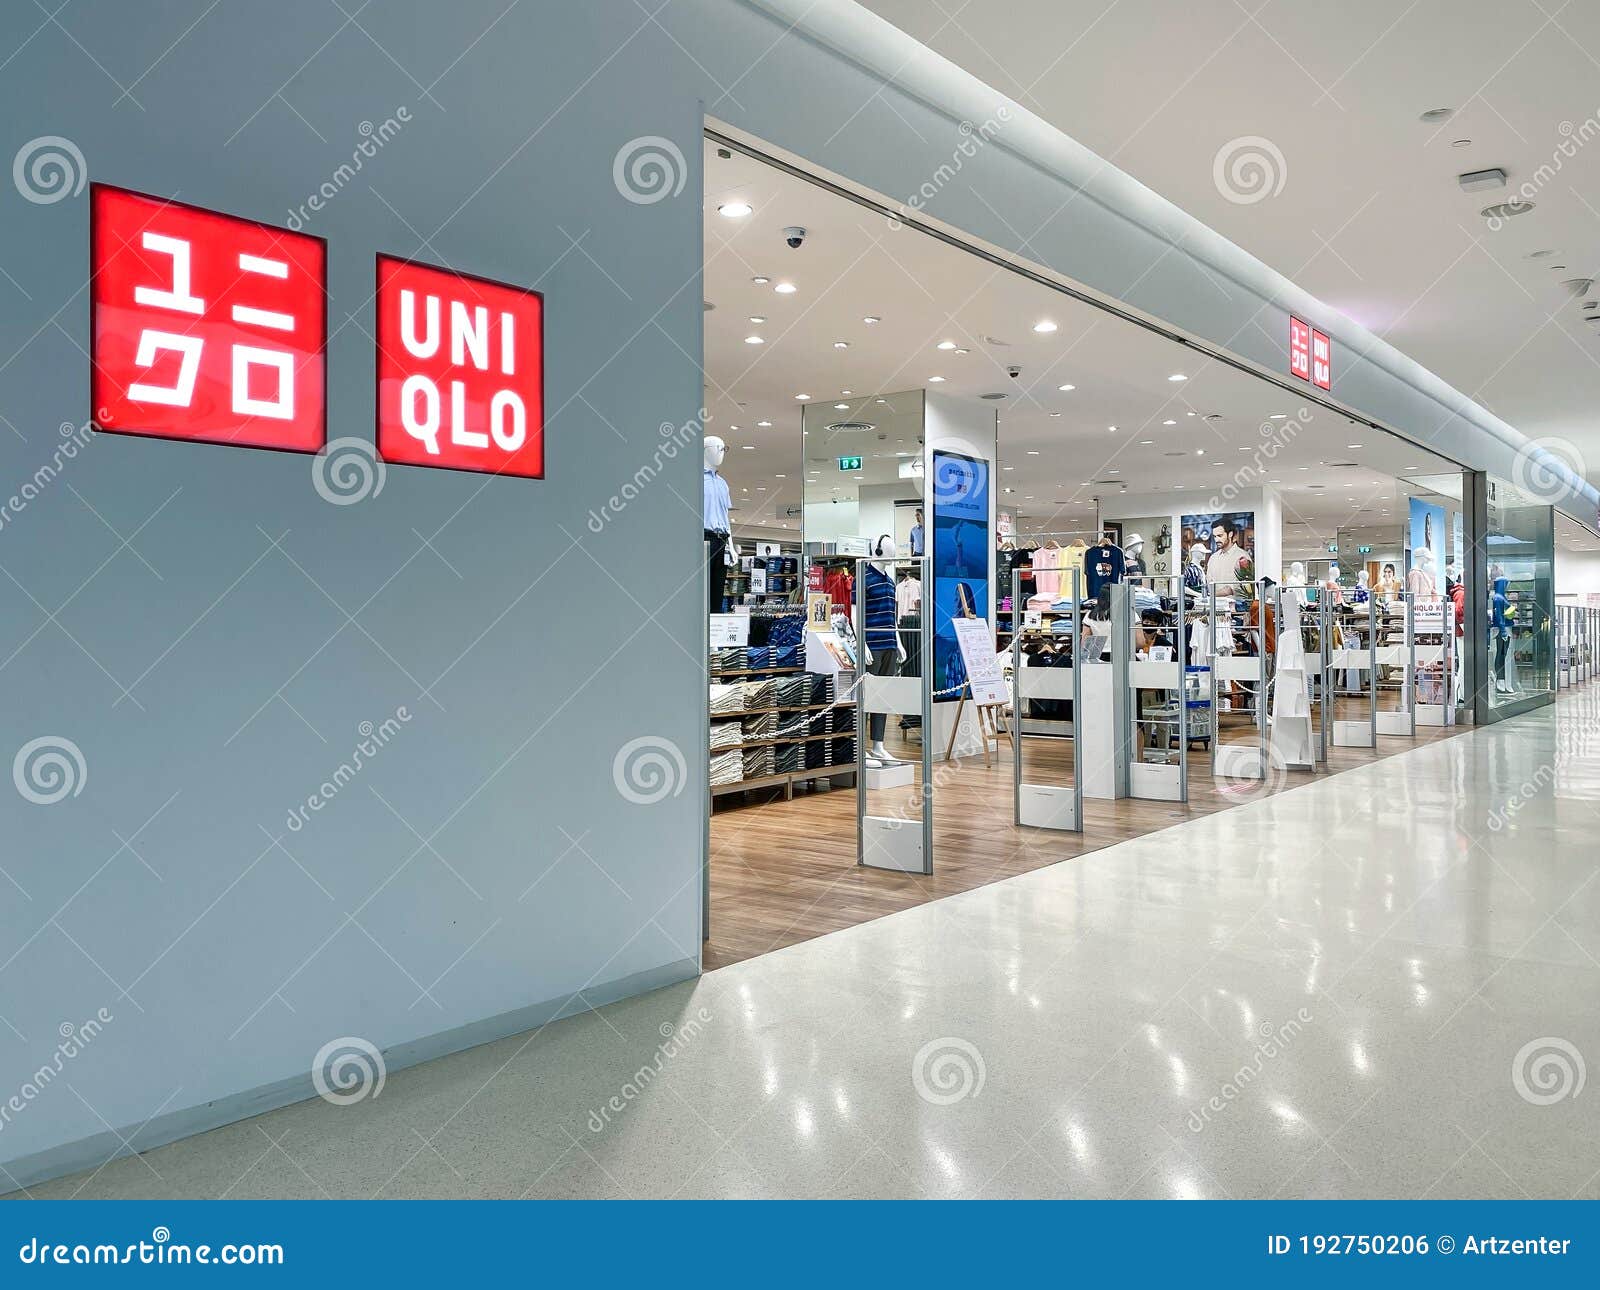 A Strong Identity is an Icon Says the Designer Behind the Uniqlo Logo